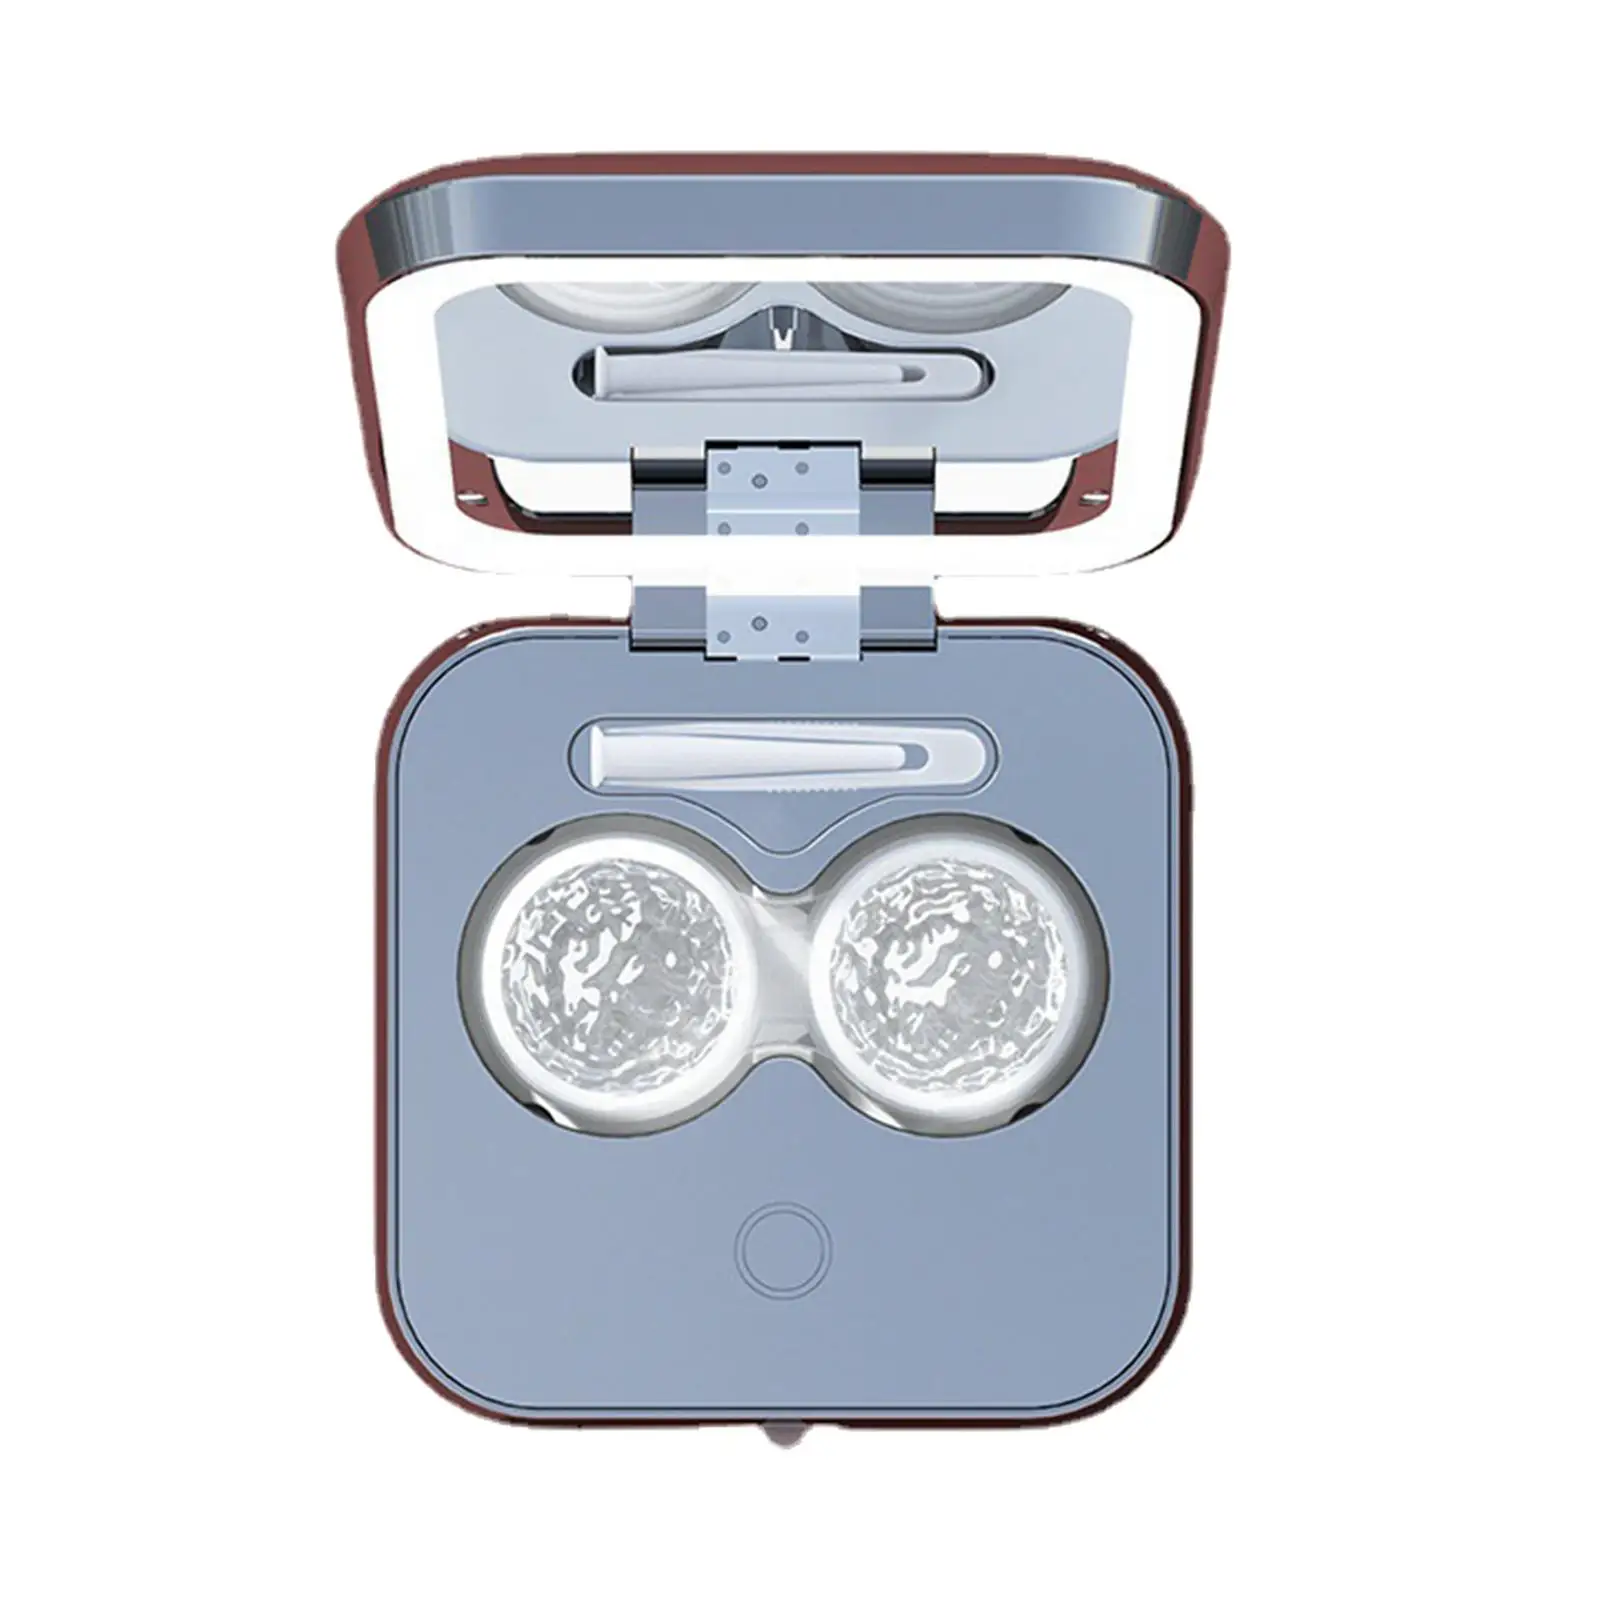 Contact Lens Ultrasonic Cleaning Machine with Mirror Tweezers Small Size Cleaning Tool Container Eye Contact Lens Case Women Men